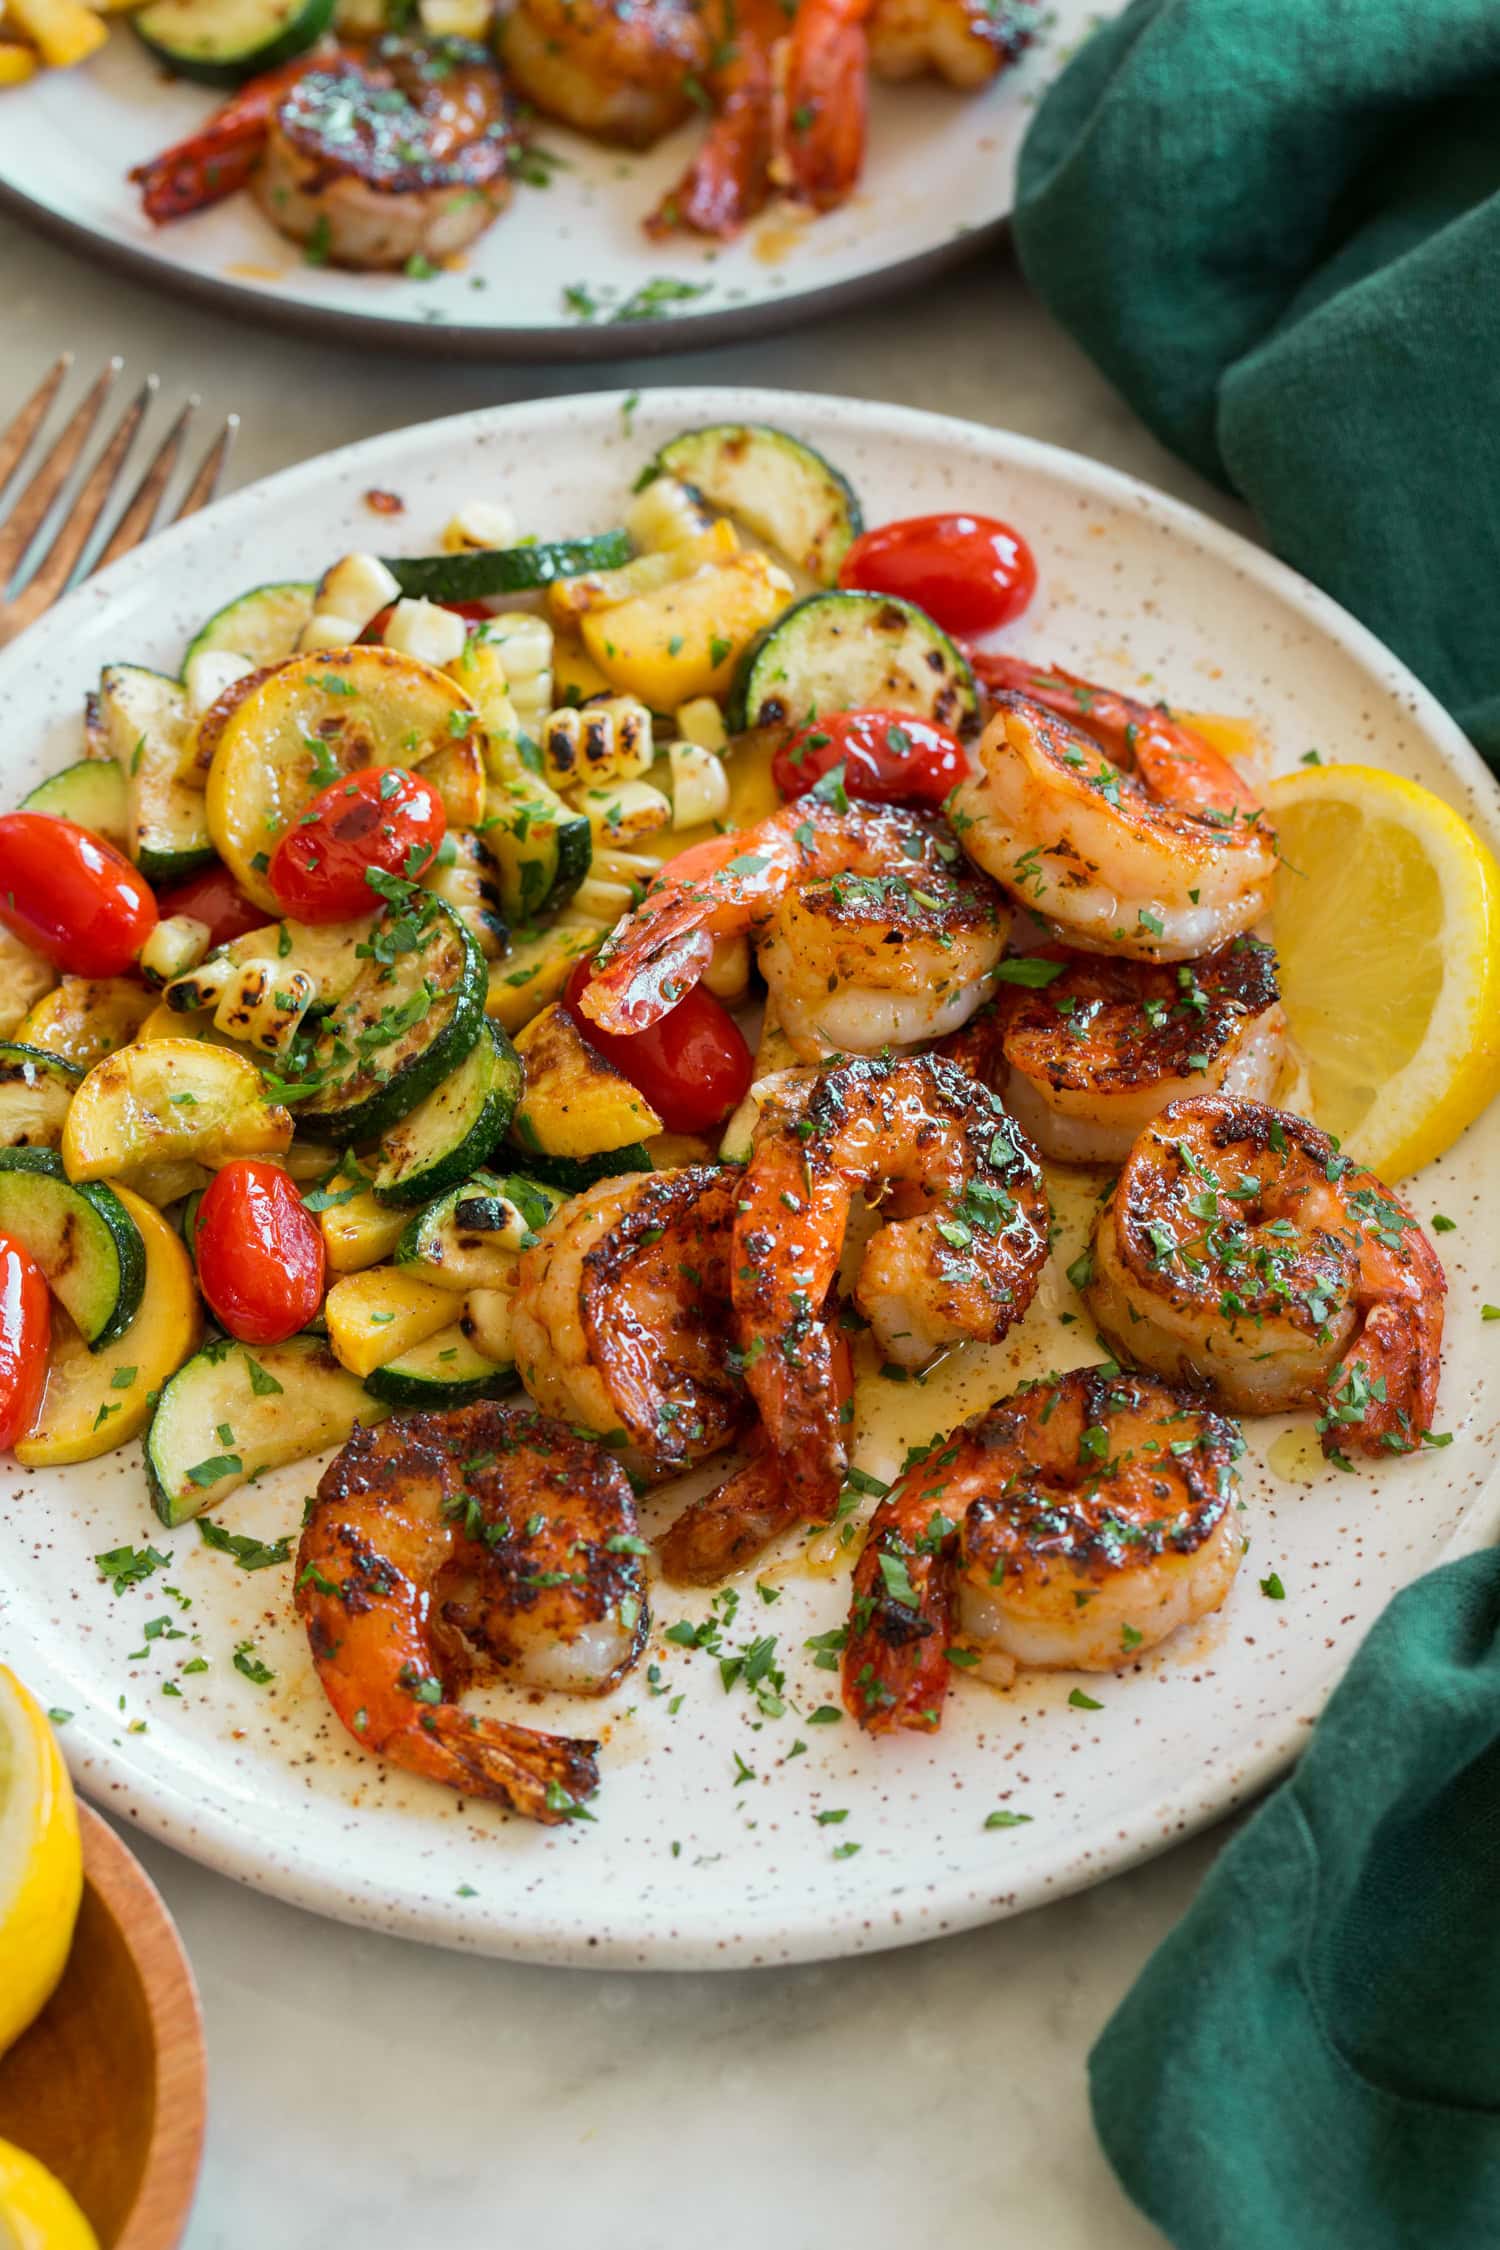 Shrimp with serving suggestion of zucchini, squash, corn and tomatoes.